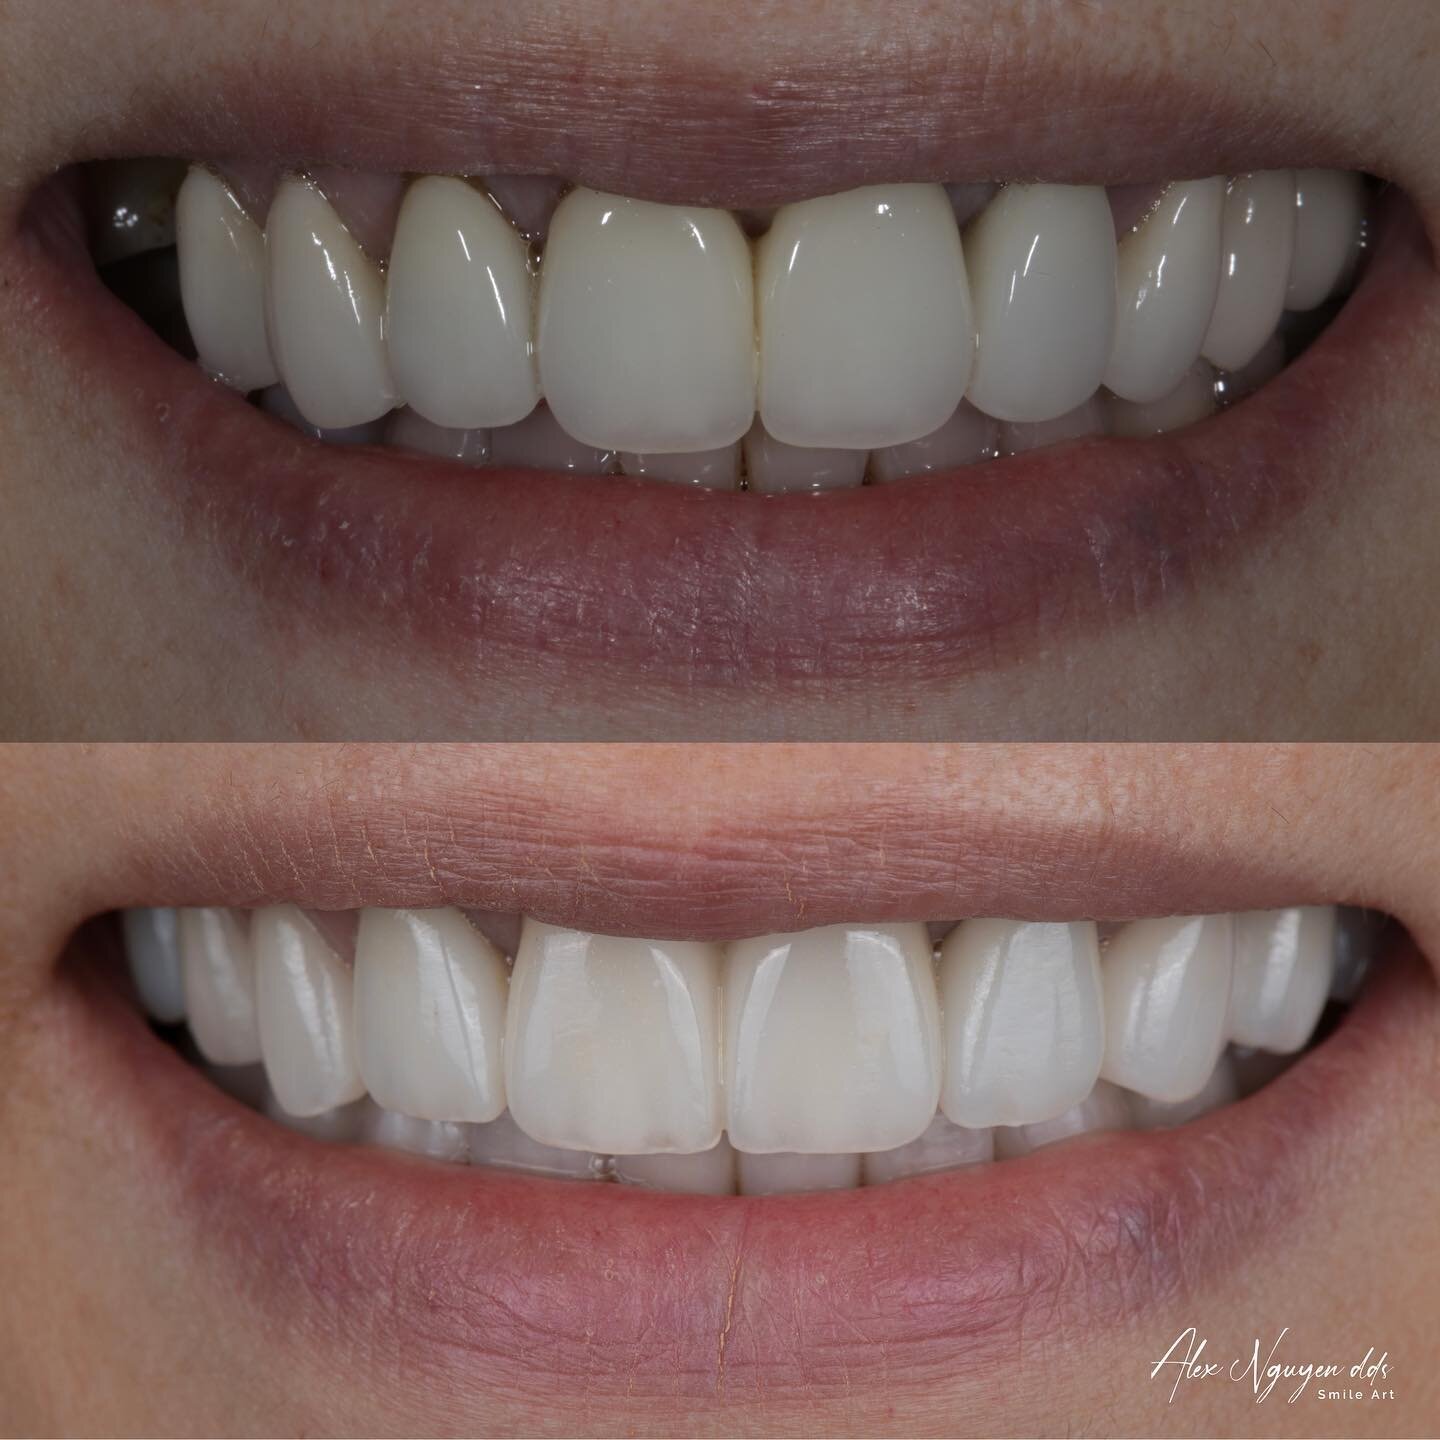 Refresh.  Rejuvenate.  Rejoice. 

A full mouth reconstruction case we just finished.  My patient needed her open bite corrected so that she can chew efficiently.  The result of &ldquo;form follows function&rdquo; is a beautiful smile she will cherish